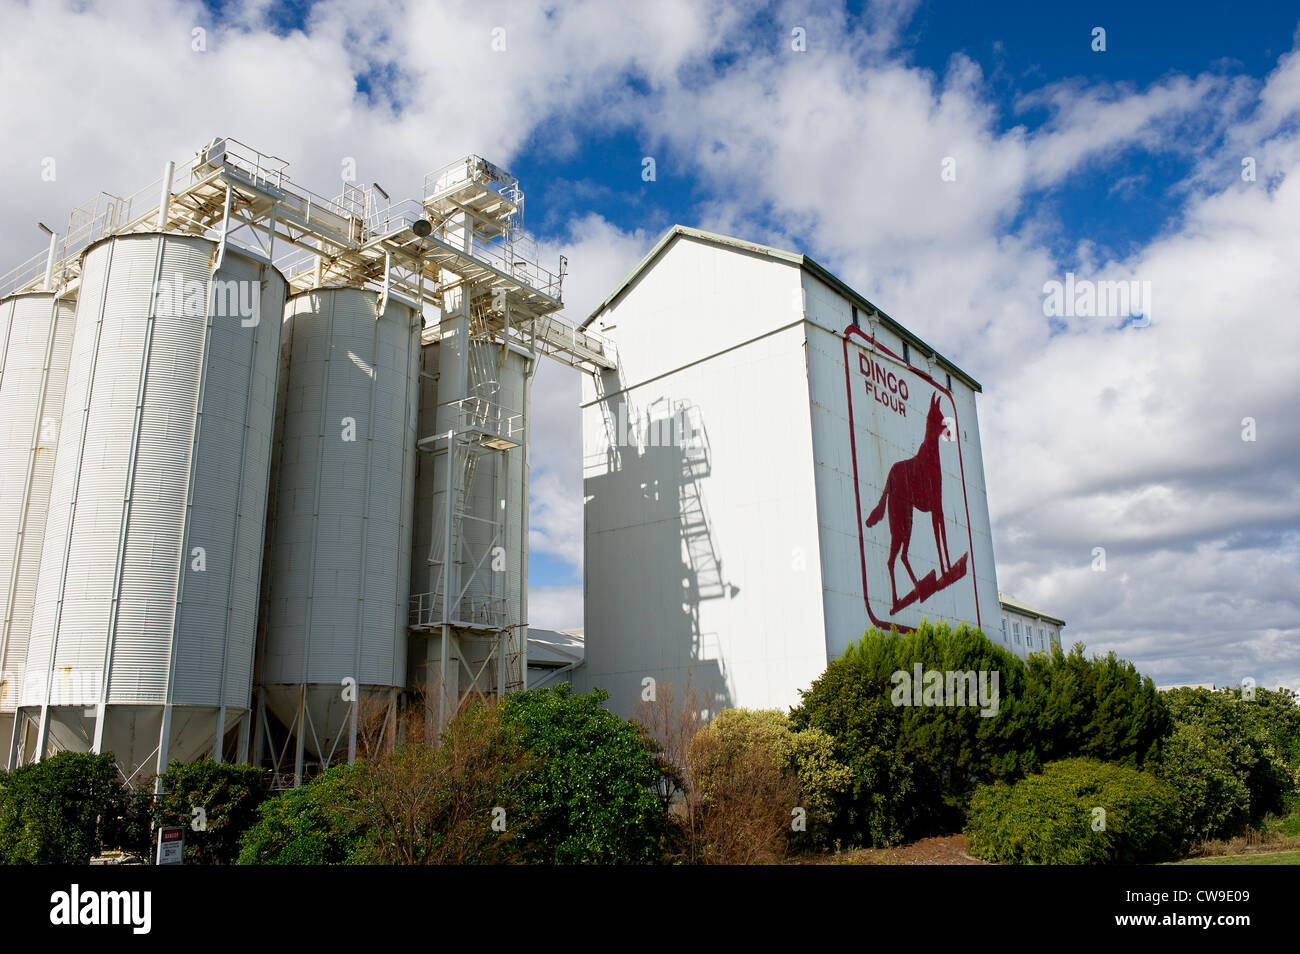 Fremantle Western Australia - The Dingo Flour sign on the side of the Great Southern Roller Flour Mills in Fremantle, Western Australia Stock Photo